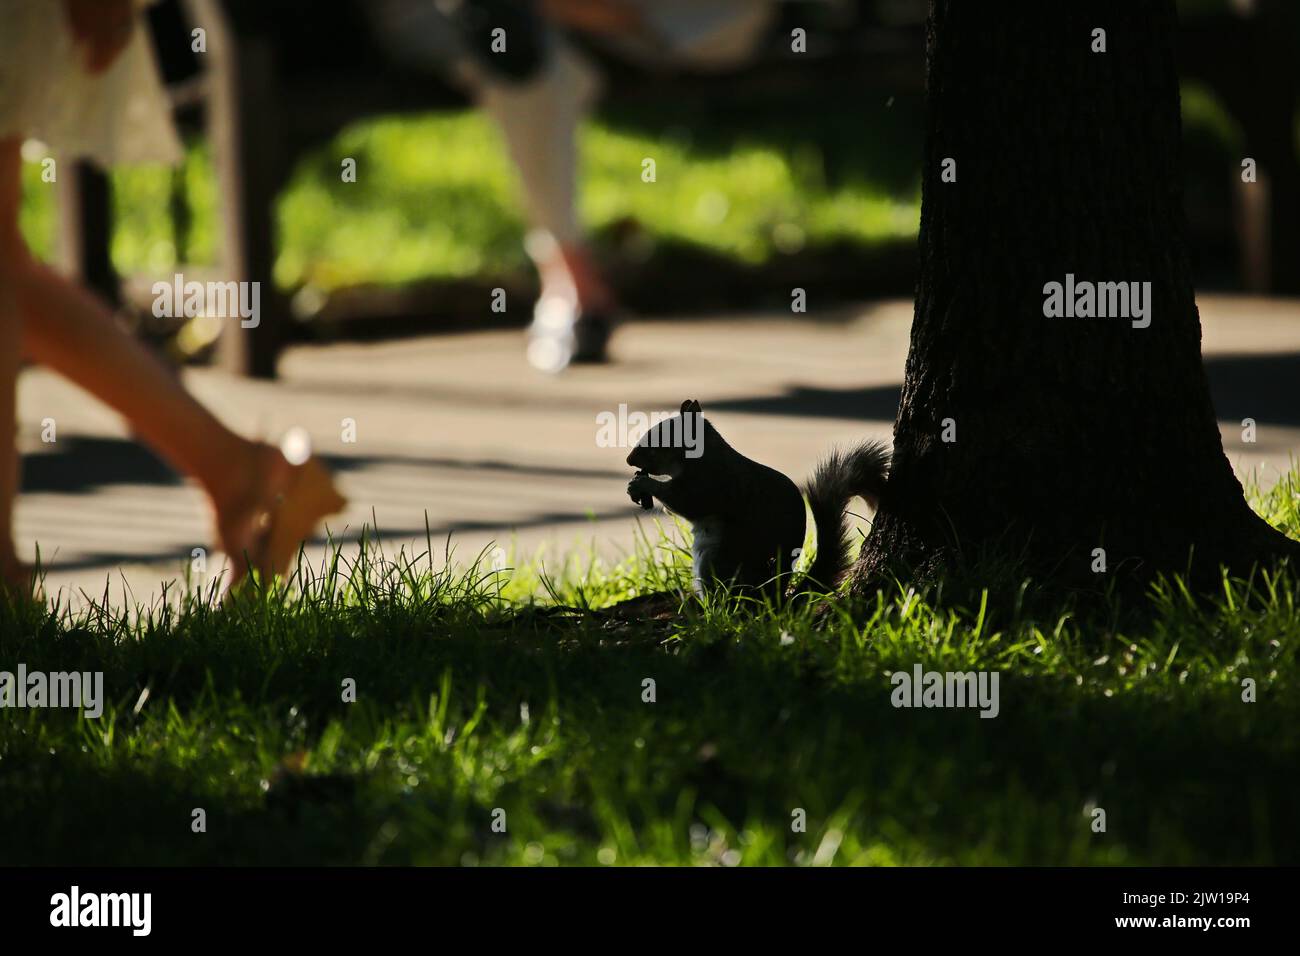 Squirrel in silhouette at a city park Stock Photo